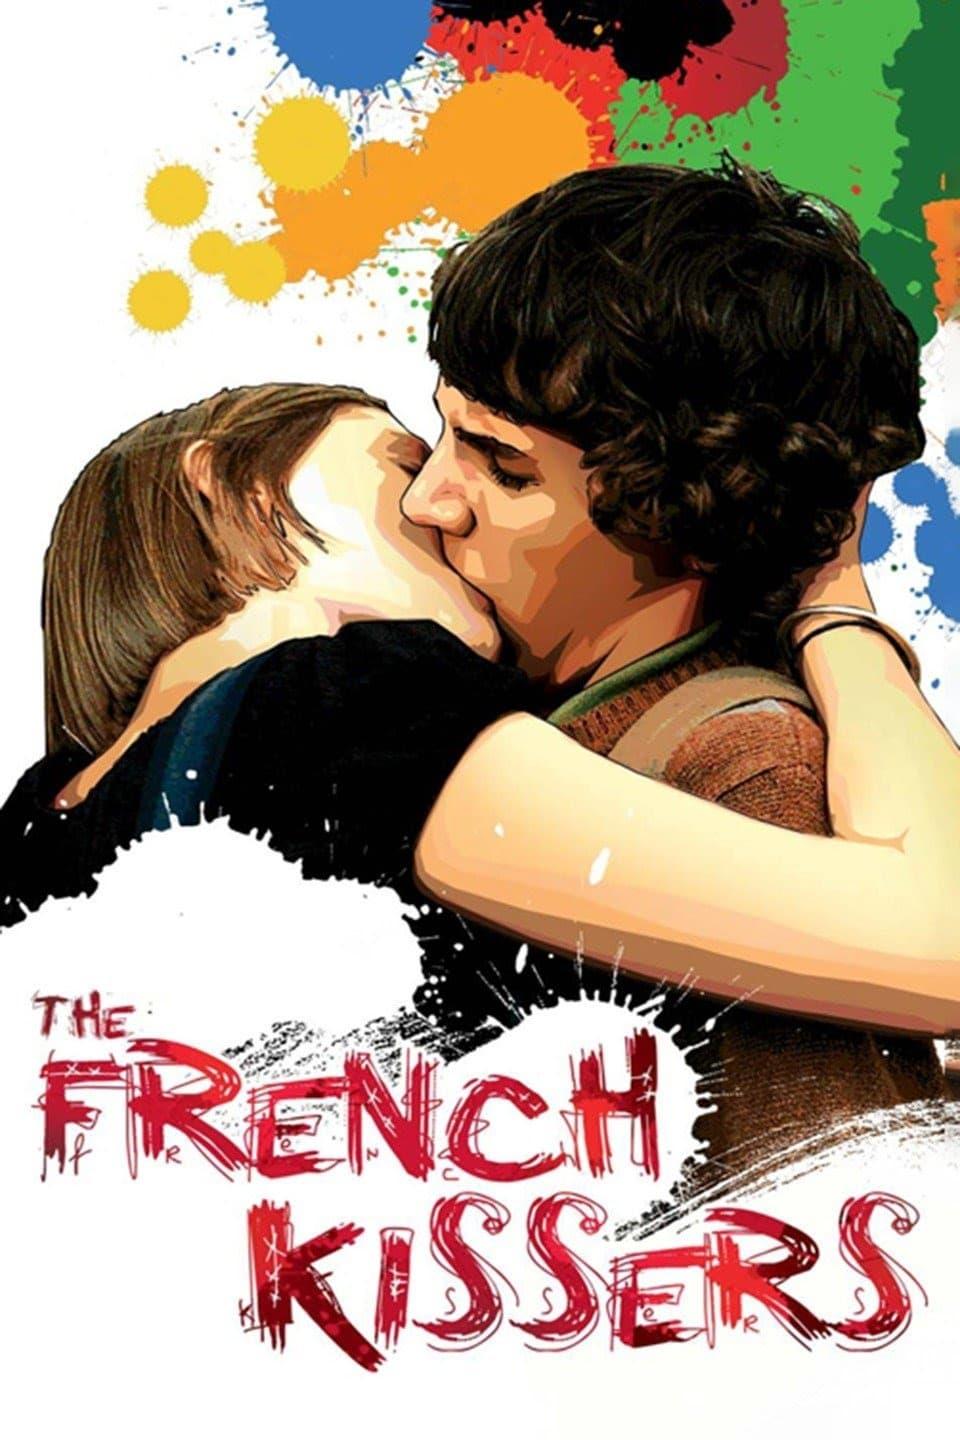 The French Kissers poster